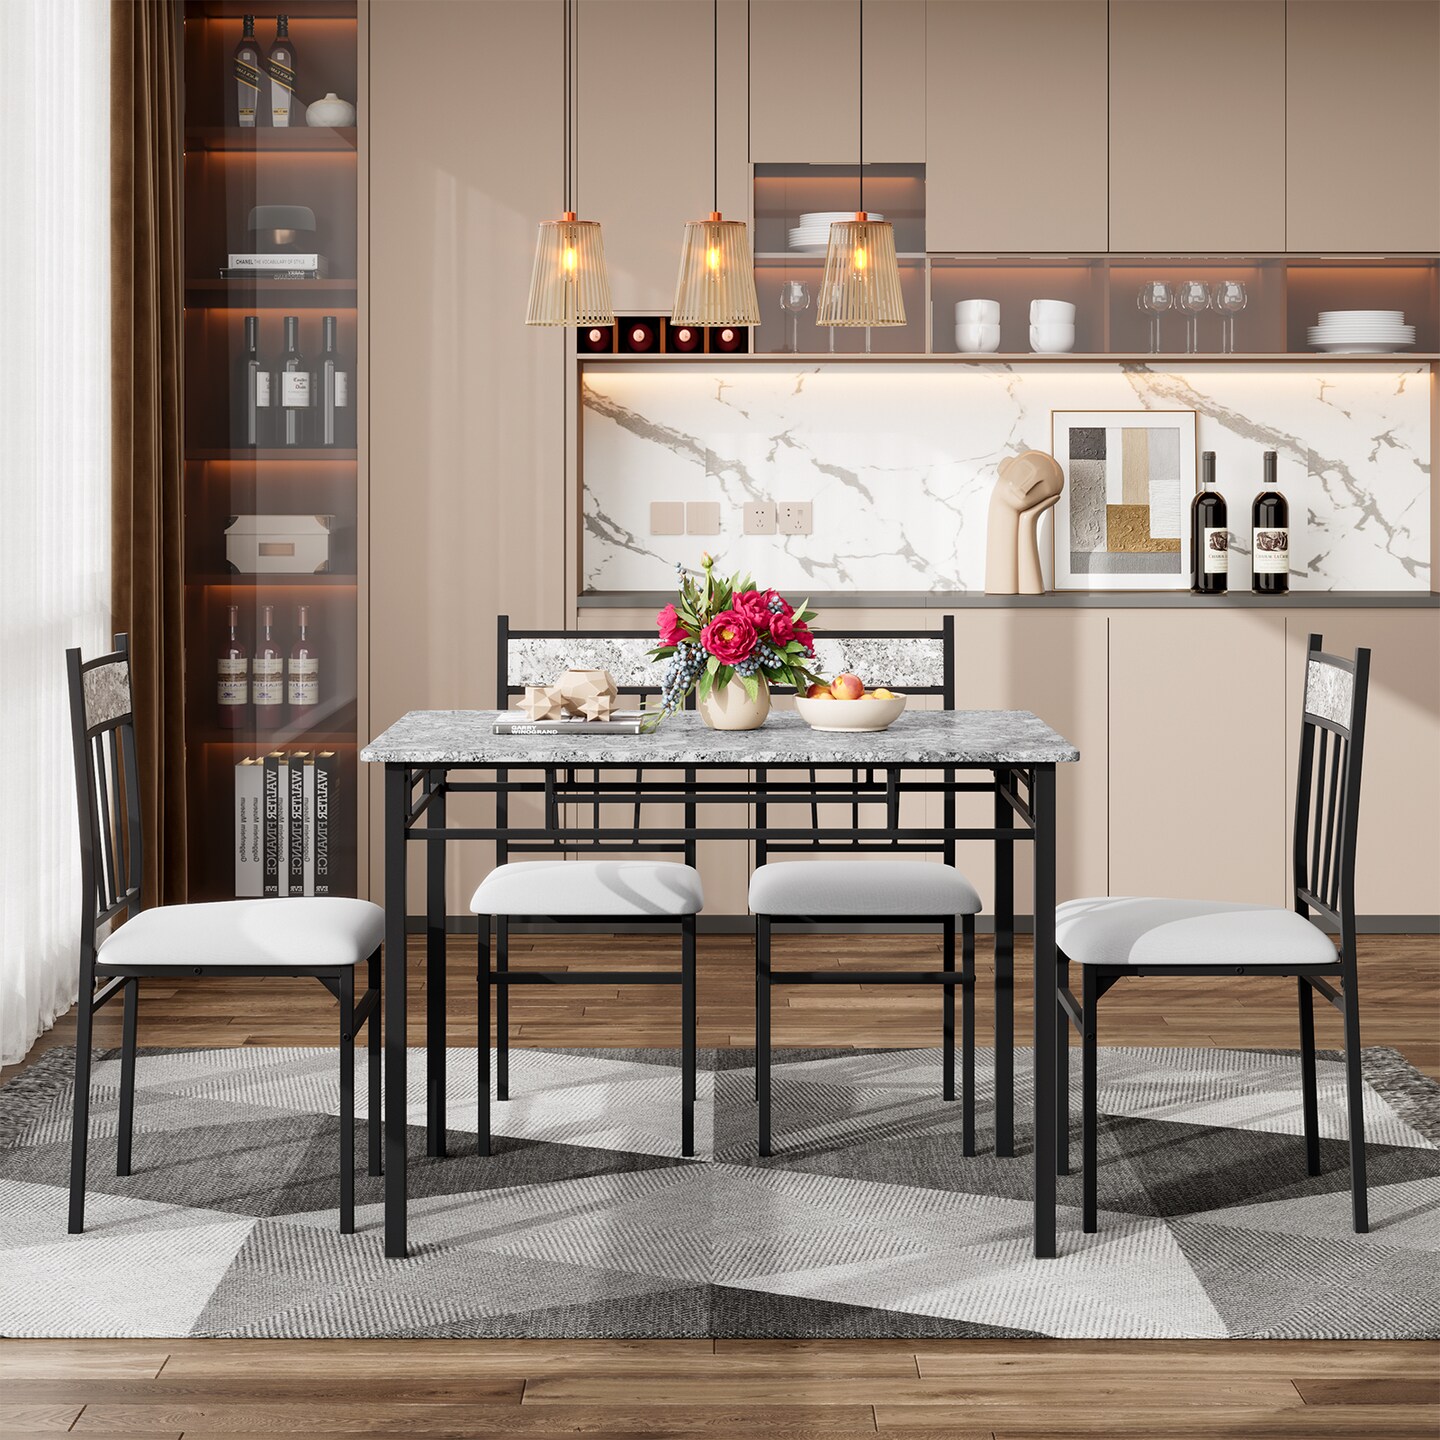 5 Pieces Faux Marble Dining Set Table